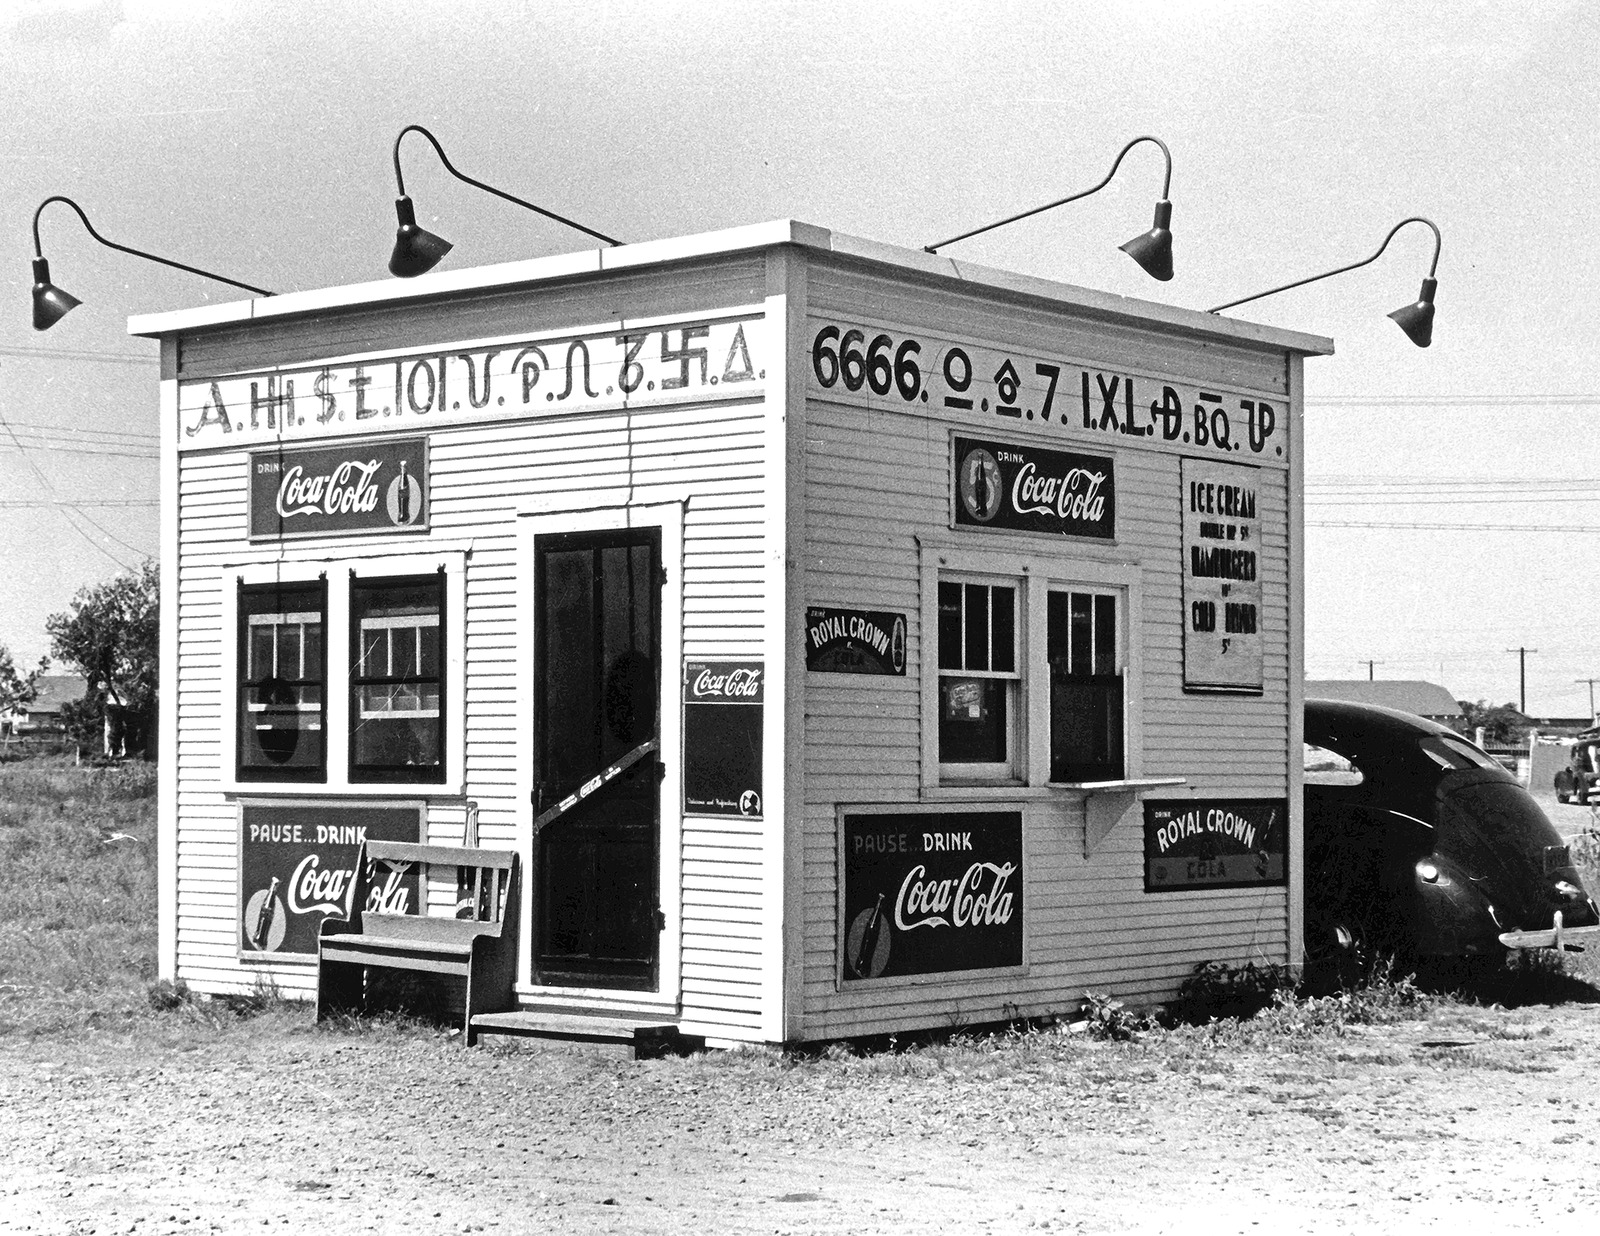 1939 Hamburger Stand Dumas Texas Classic Vintage Old Picture Photo Print 5x7